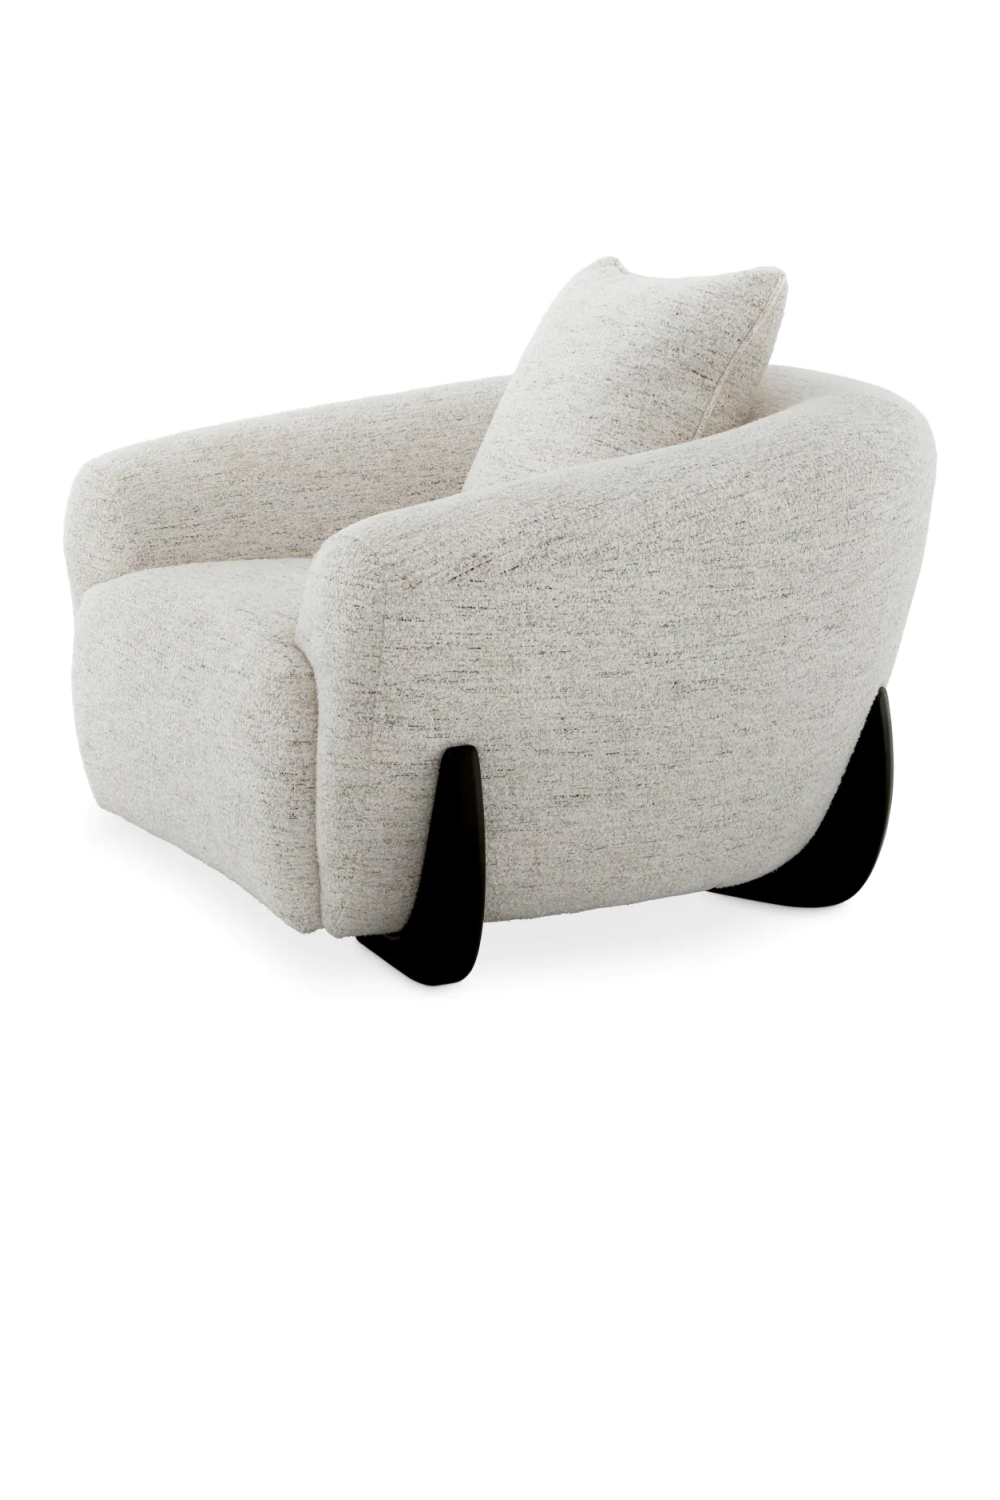 White Curved Lounge Chair | Eichholtz Siderno | Oroa.com